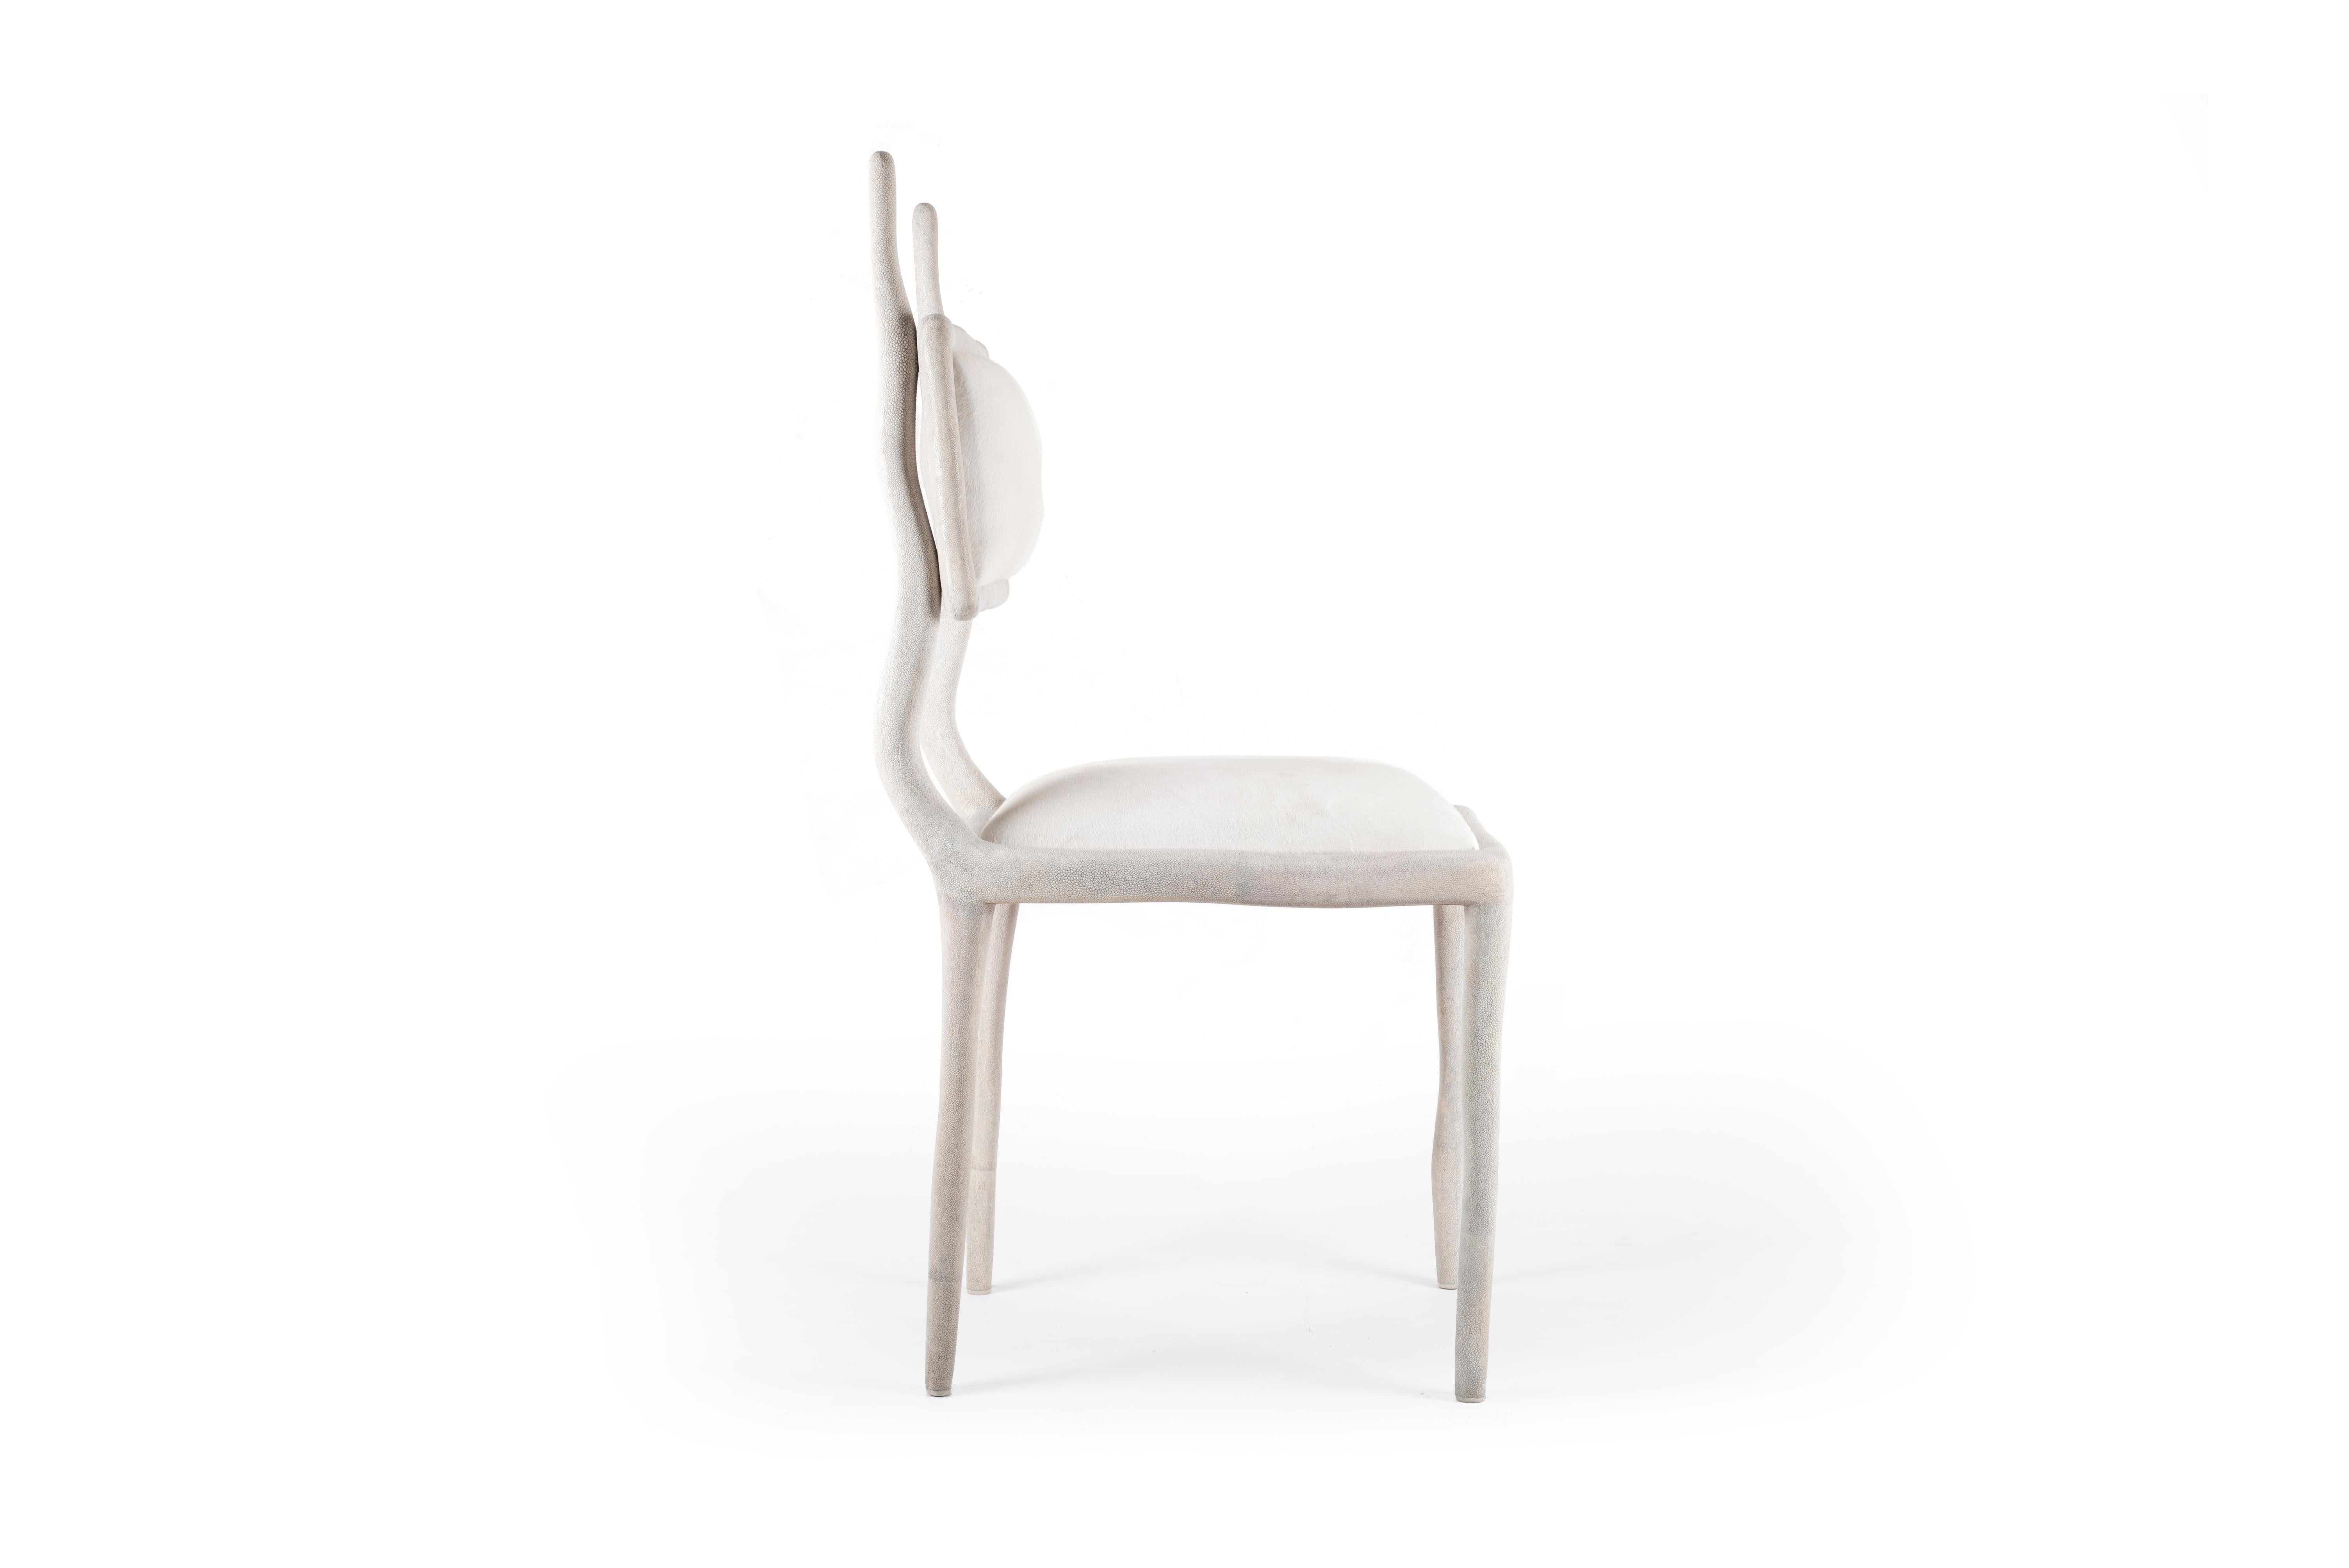 The Eden Chair in cream shagreen and upholstered in cream calf-hair adds the perfect balance between fantasy and modernity to any space. This chair can be used as an entrance piece accent or dramatized around a dining room table. The shagreen is